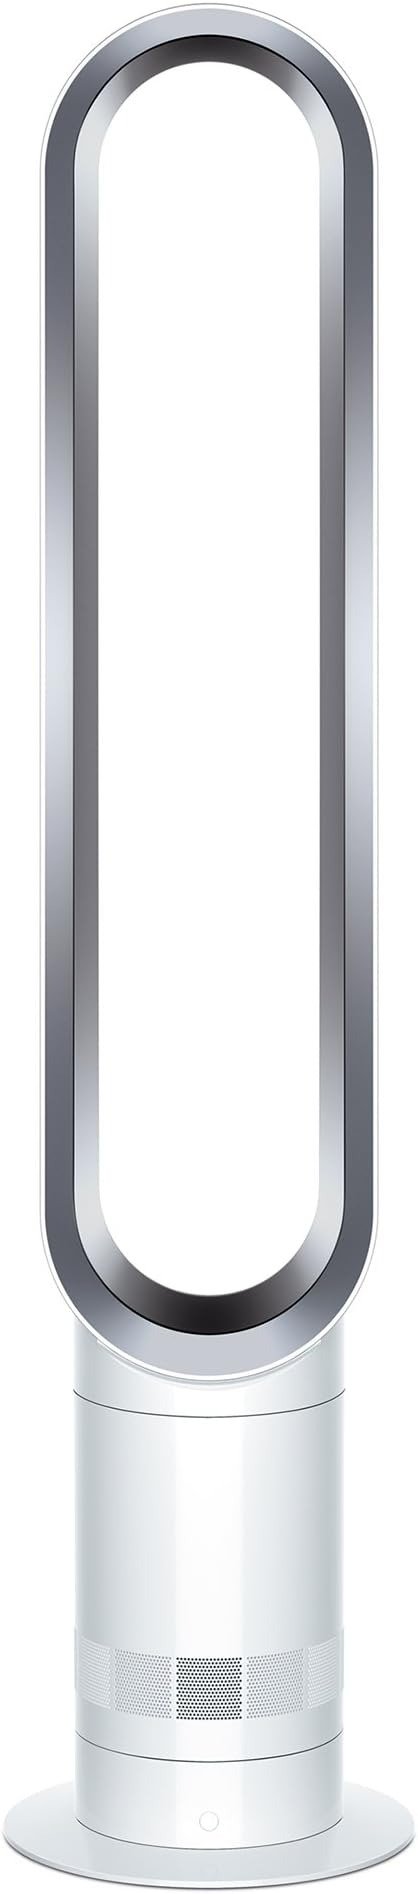 Cool™ Tower Fan AM07,White/Silver, Large